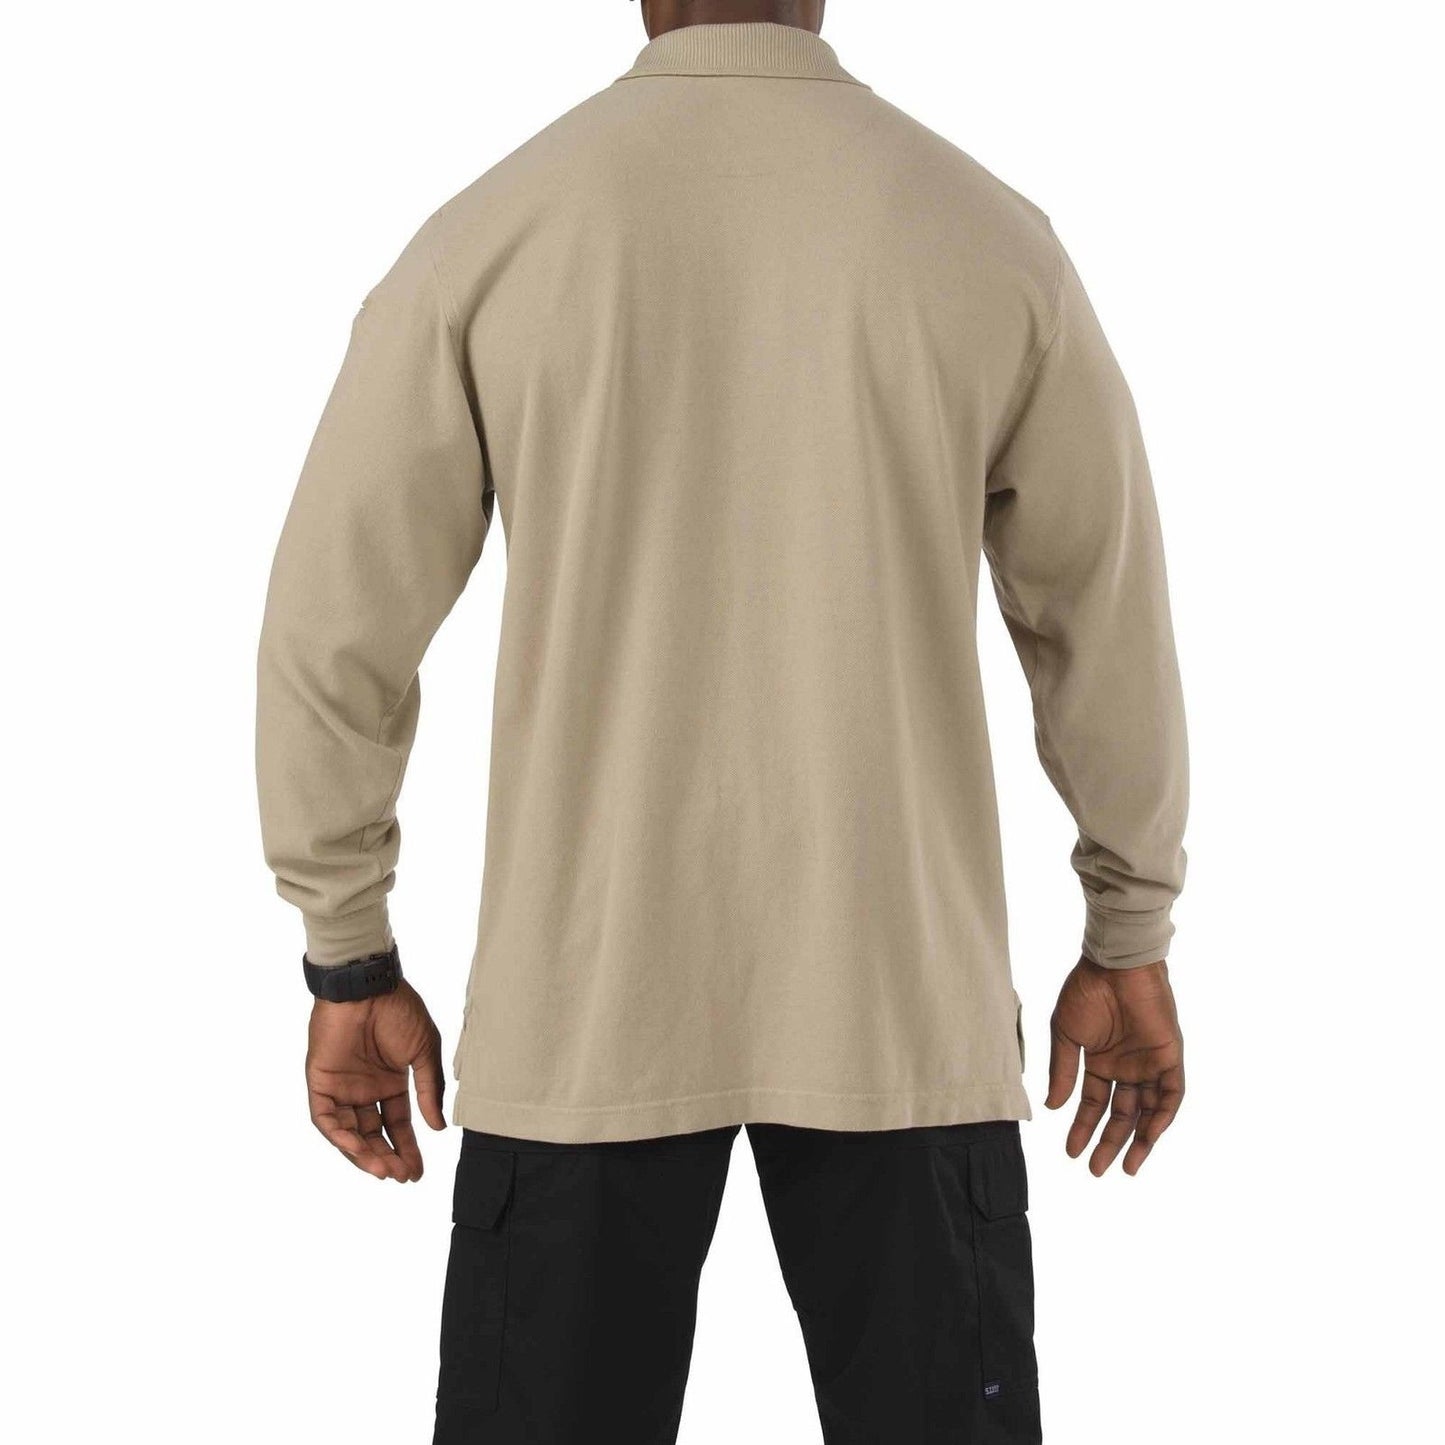 5.11 Tactical Professional Long Sleeve Polo Shirt - Mens Cotton Collared Shirts